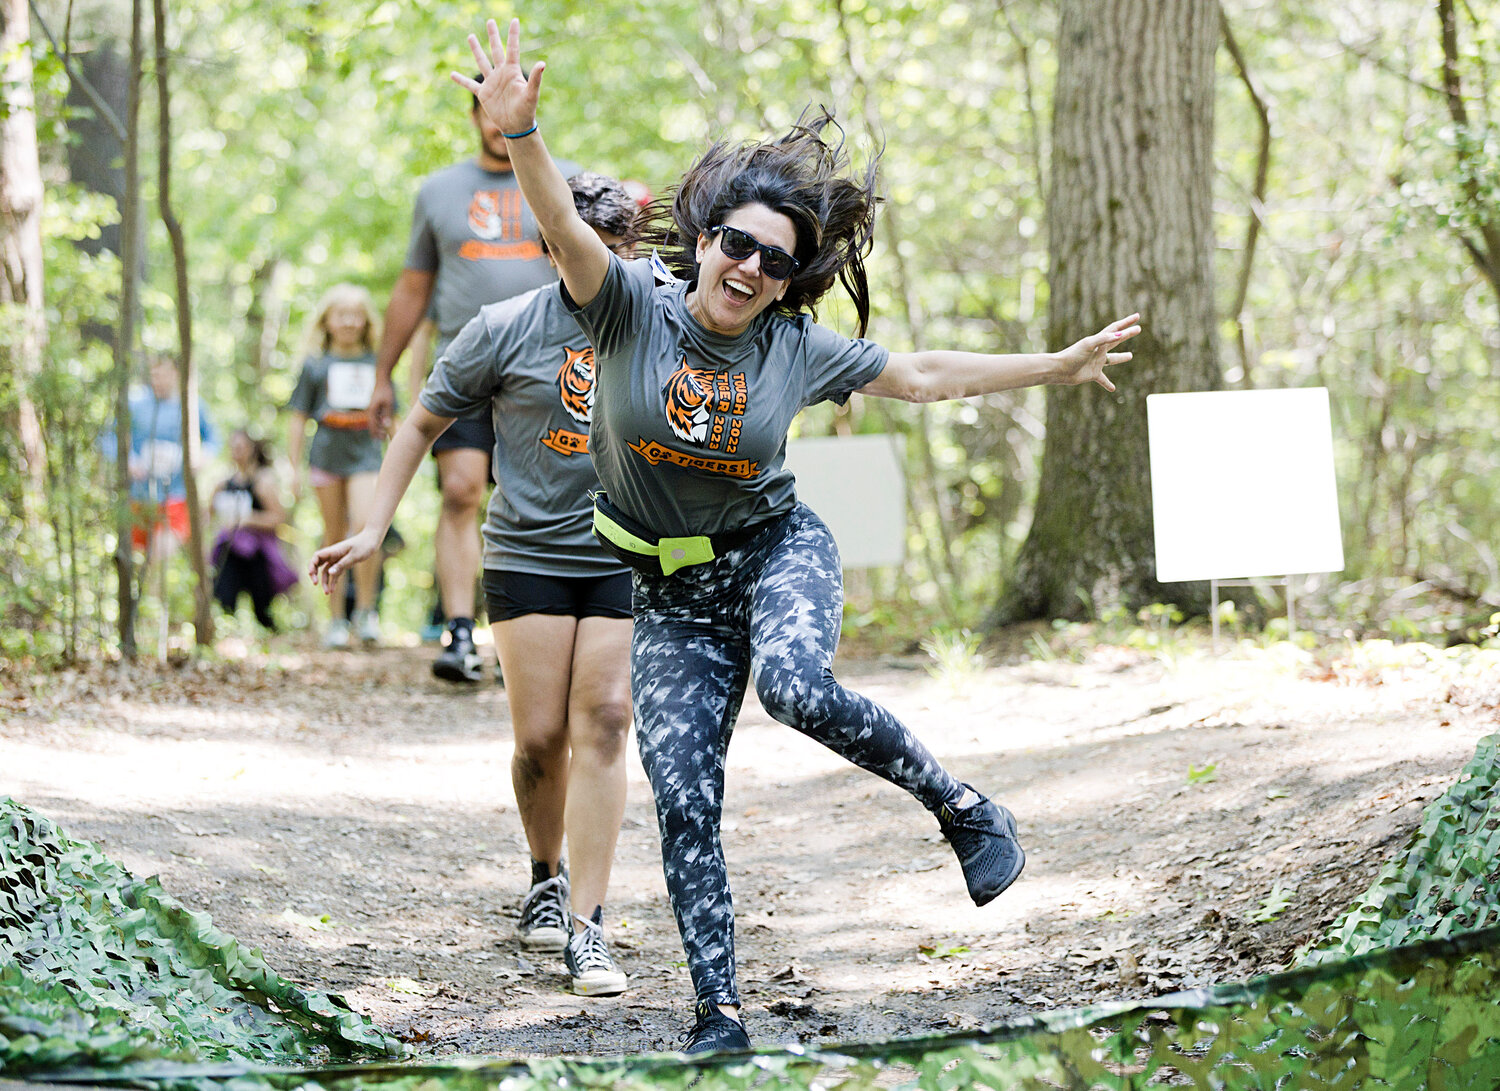 Karen Lanpher takes a dramatic leap into a mud pit while participating in Hampden Meadow's "Tough Tiger" event, Sunday.